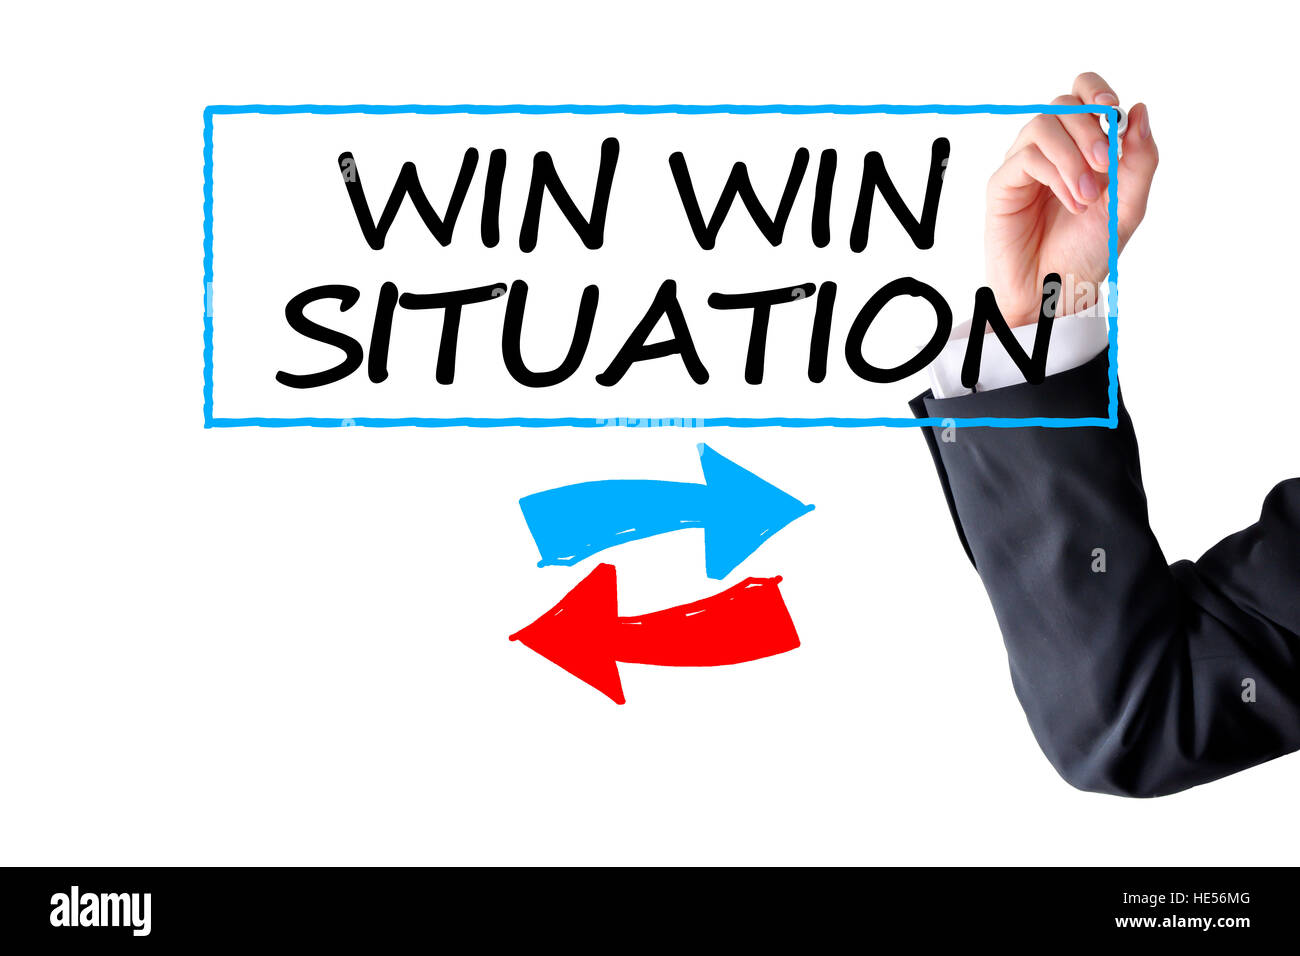 Win win situation Banque D'Images